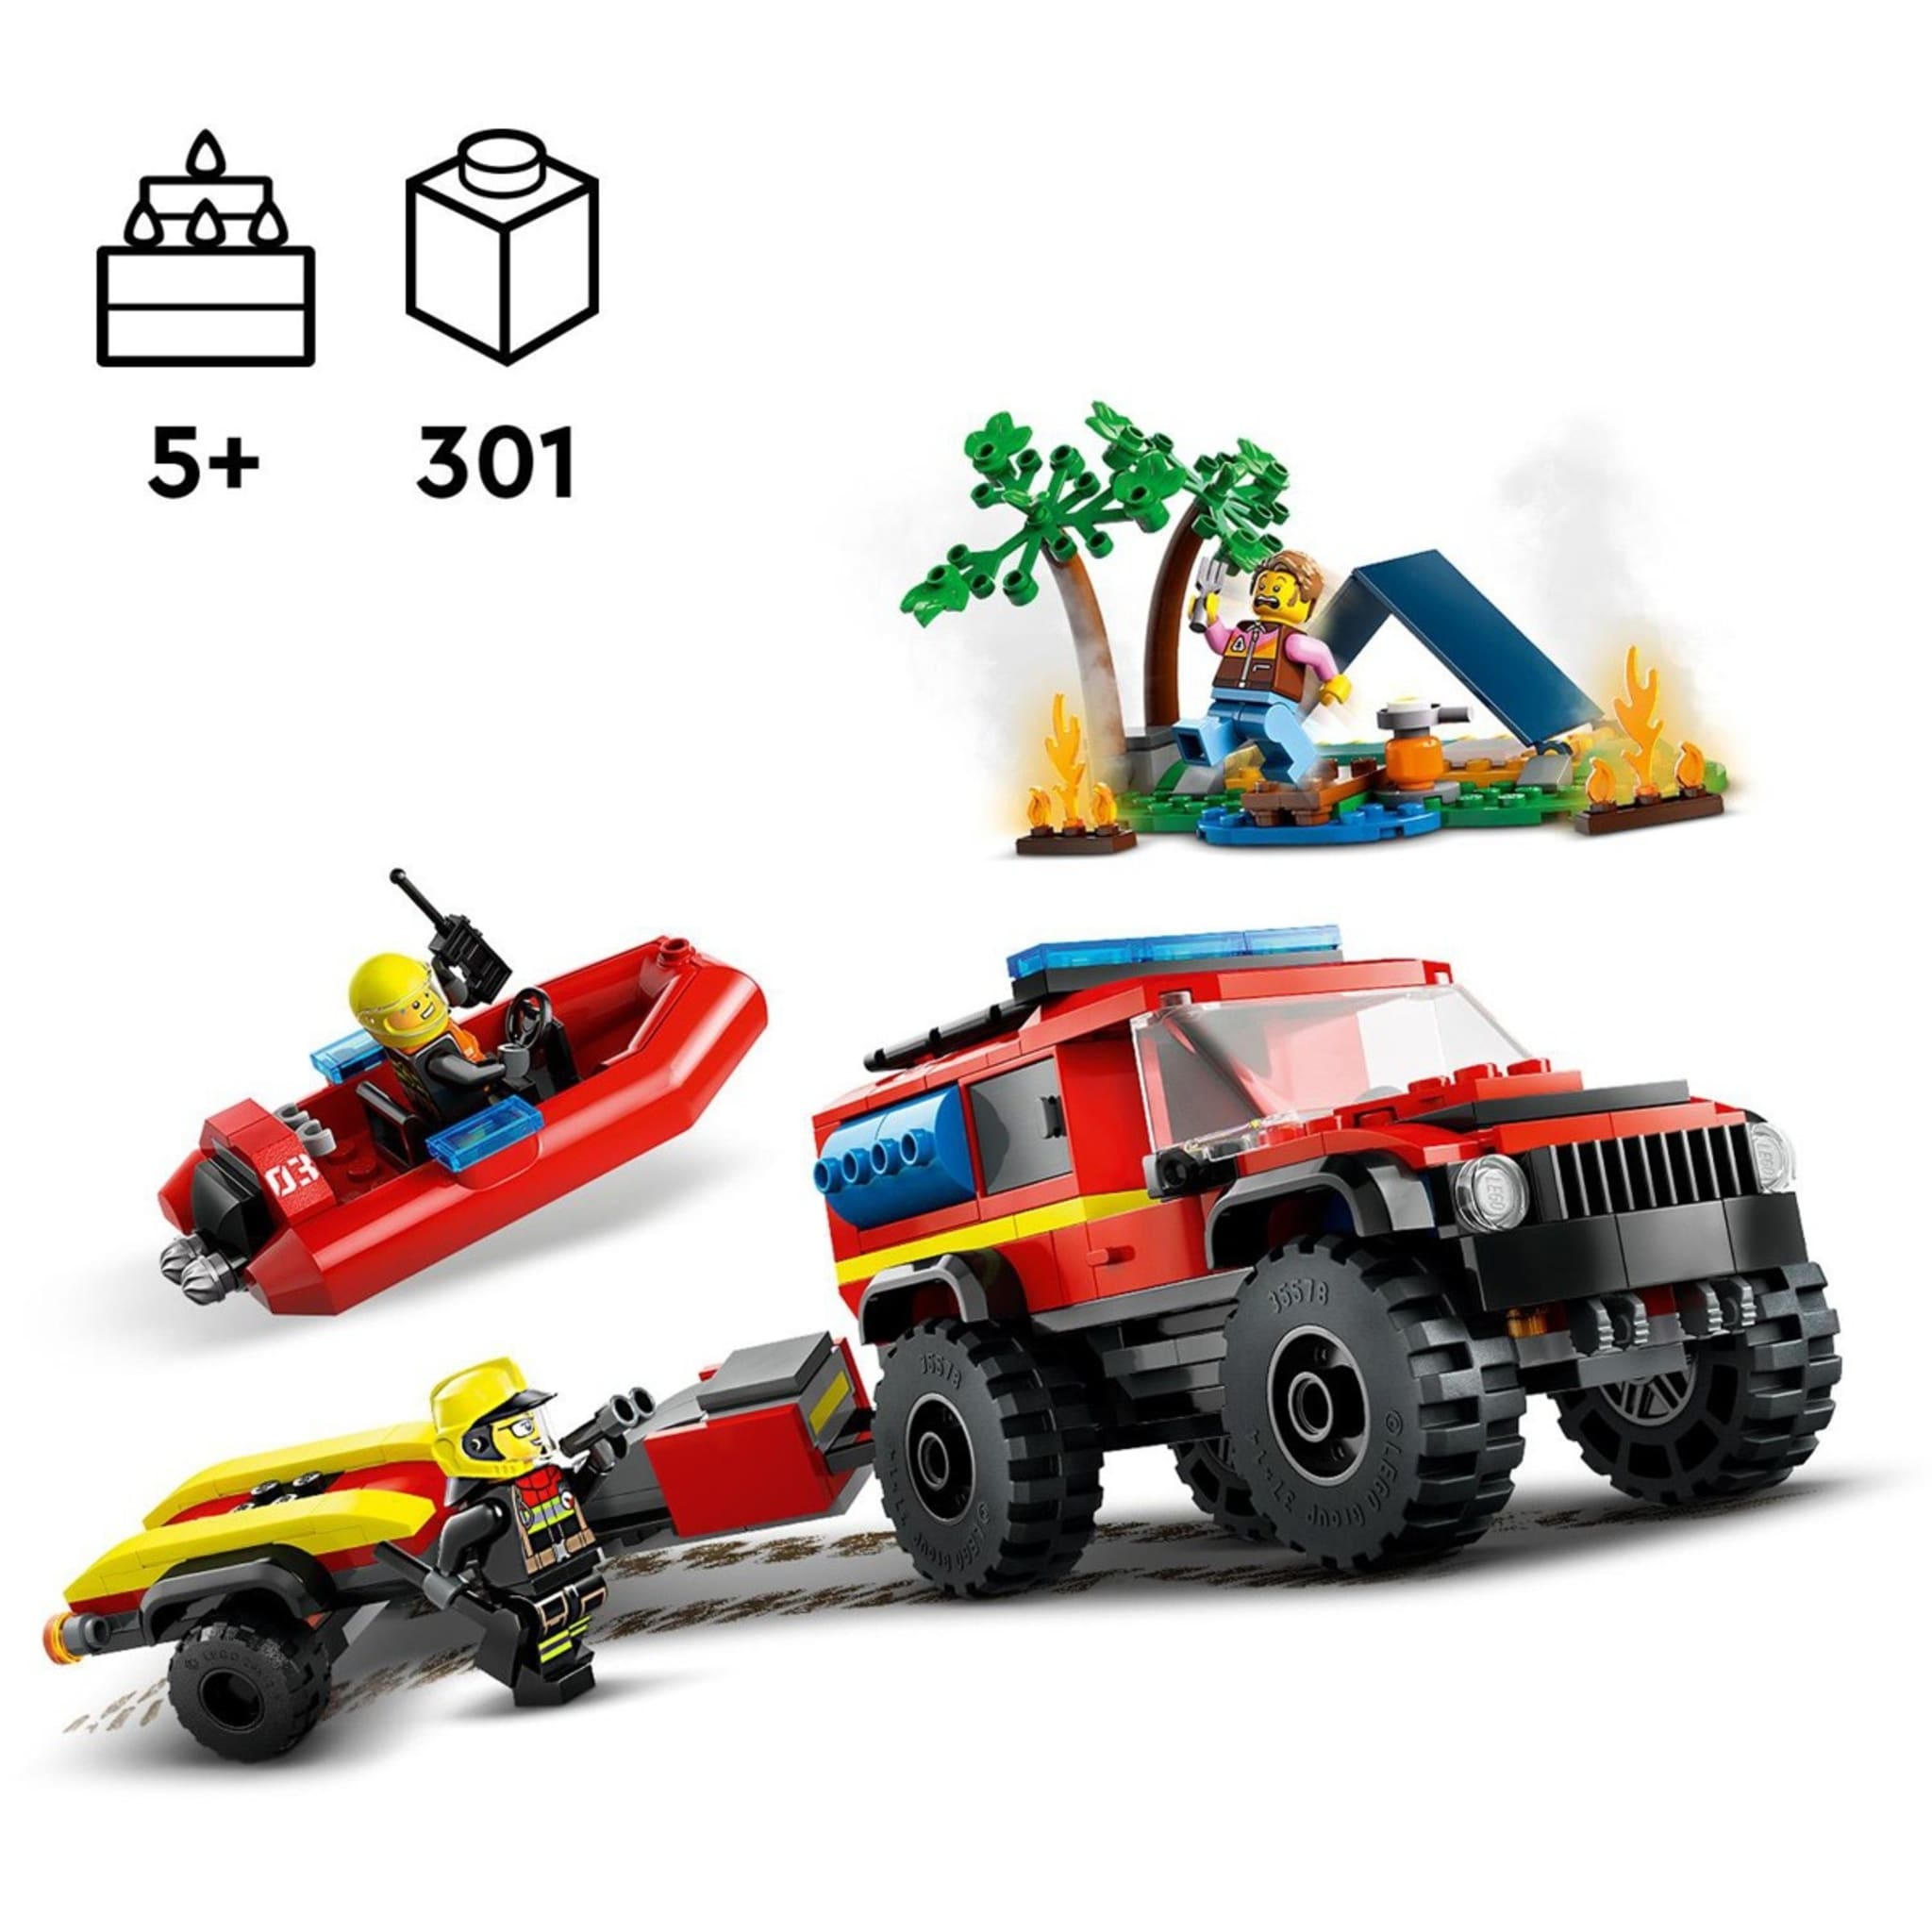 LEGO City Fire 4x4 Fire Truck with Rescue Boat 60412 - Kmart